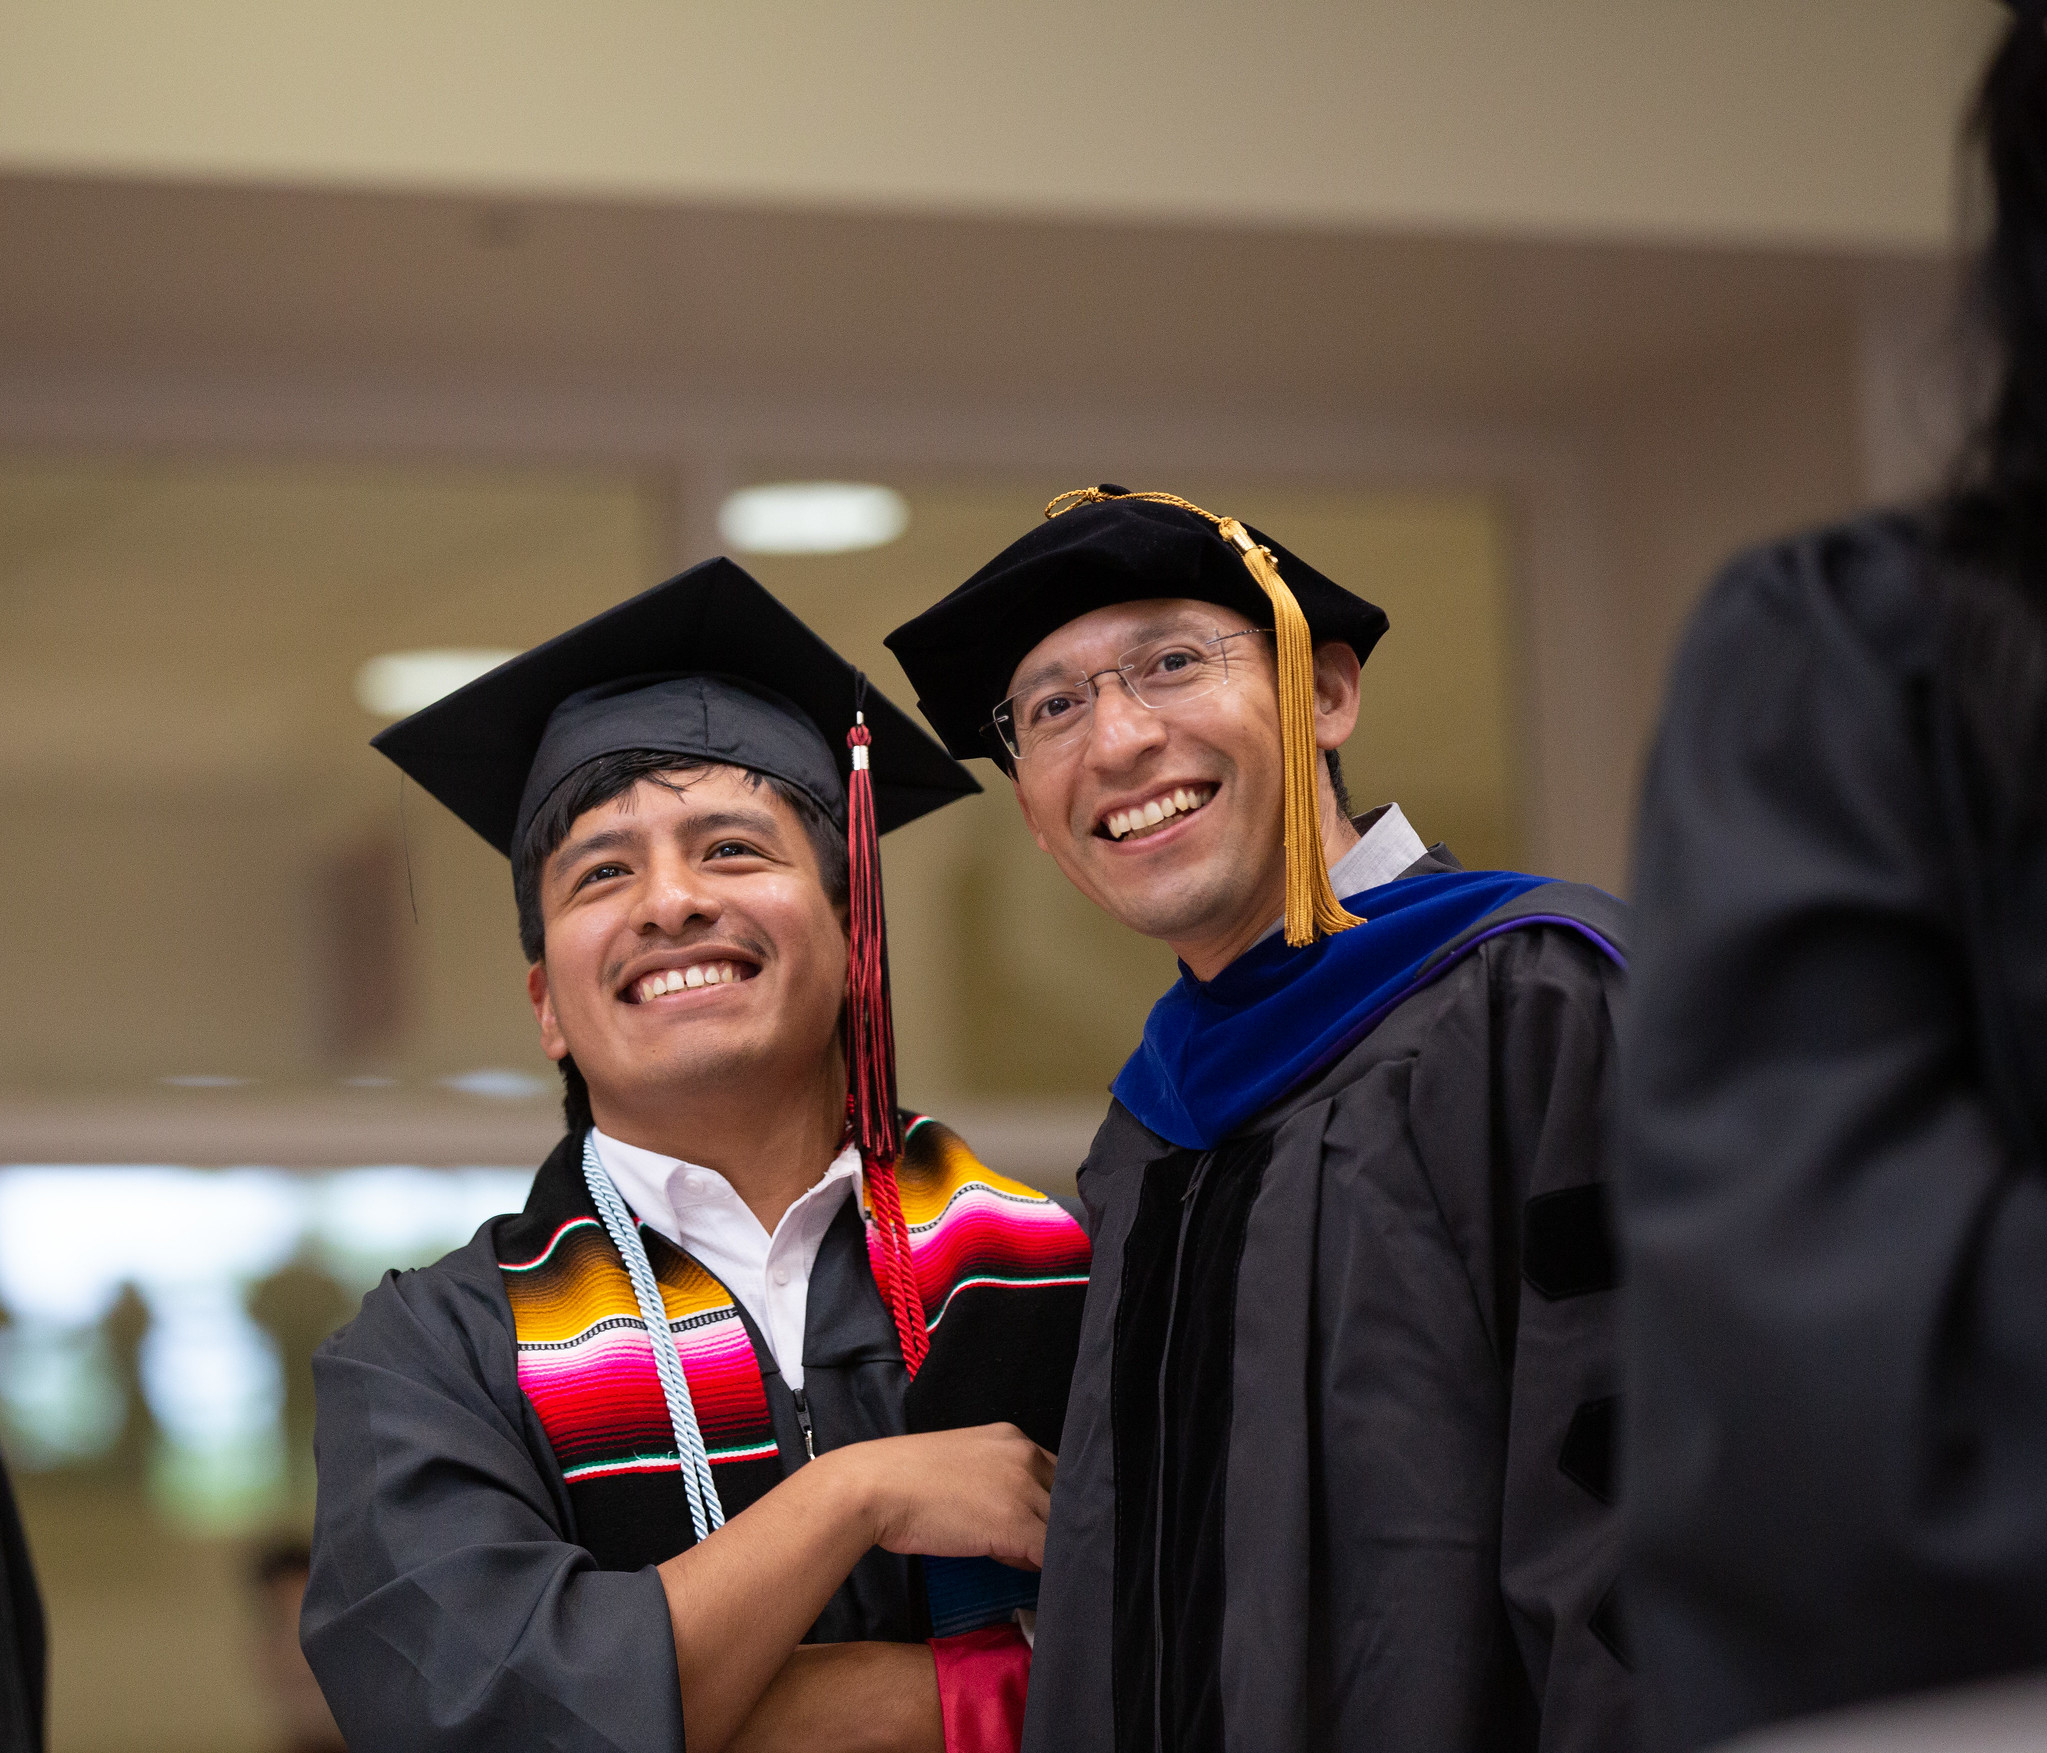 Student standing with his professor at hooding ceremony, smiling and happy